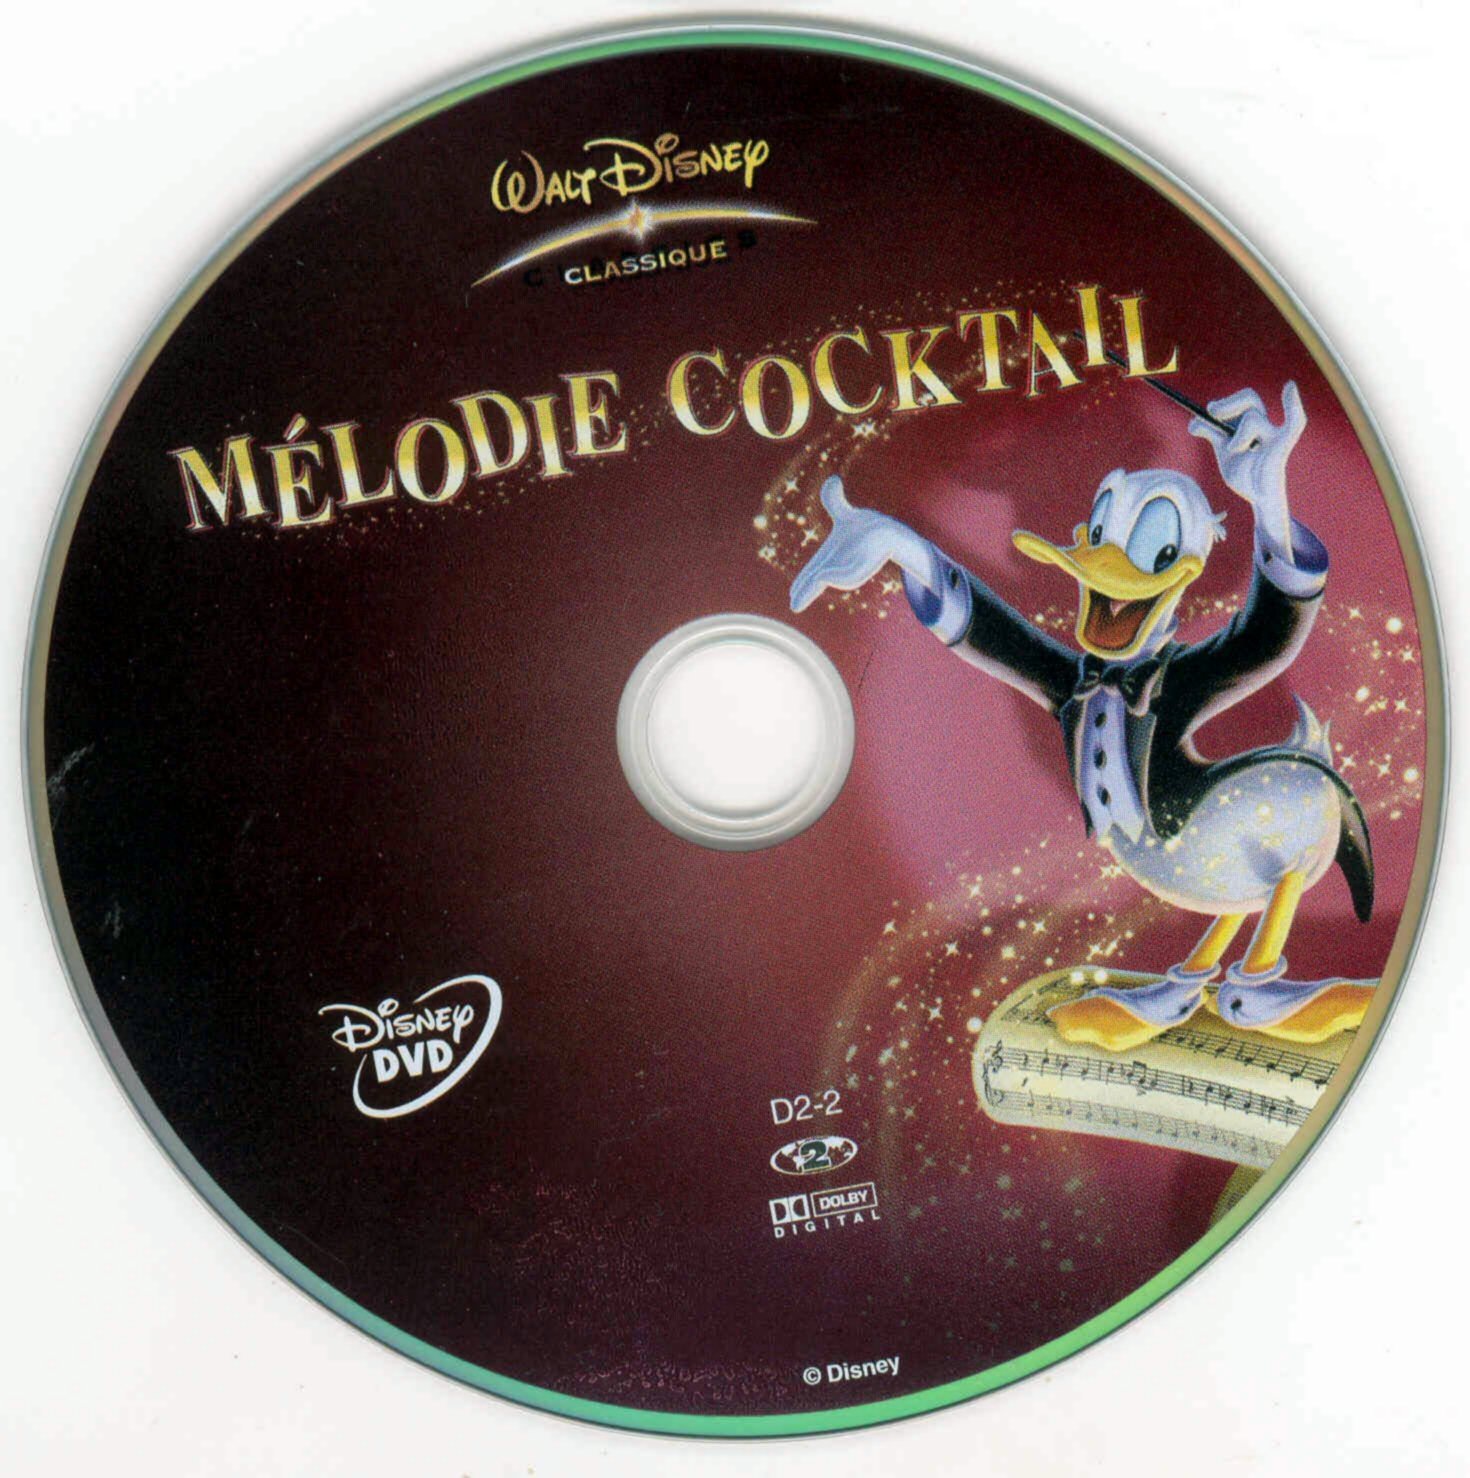 Melodie Cocktail